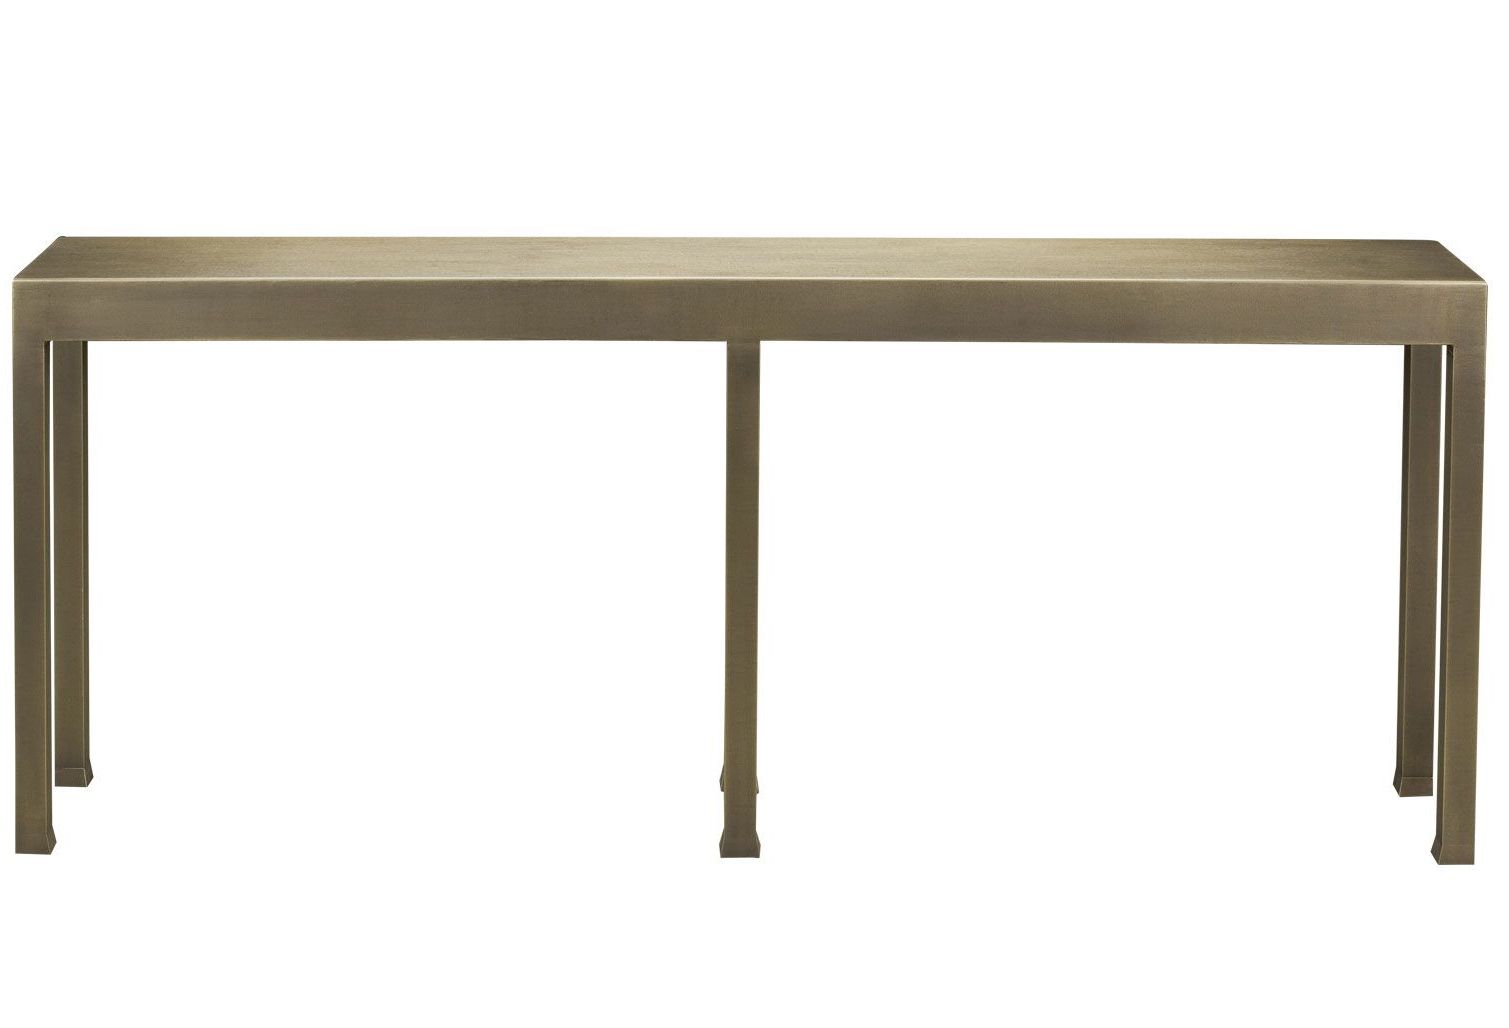 Widely Used Switch Console Tables Pertaining To Gong Consolepromemoria – Switch Modern (View 11 of 20)